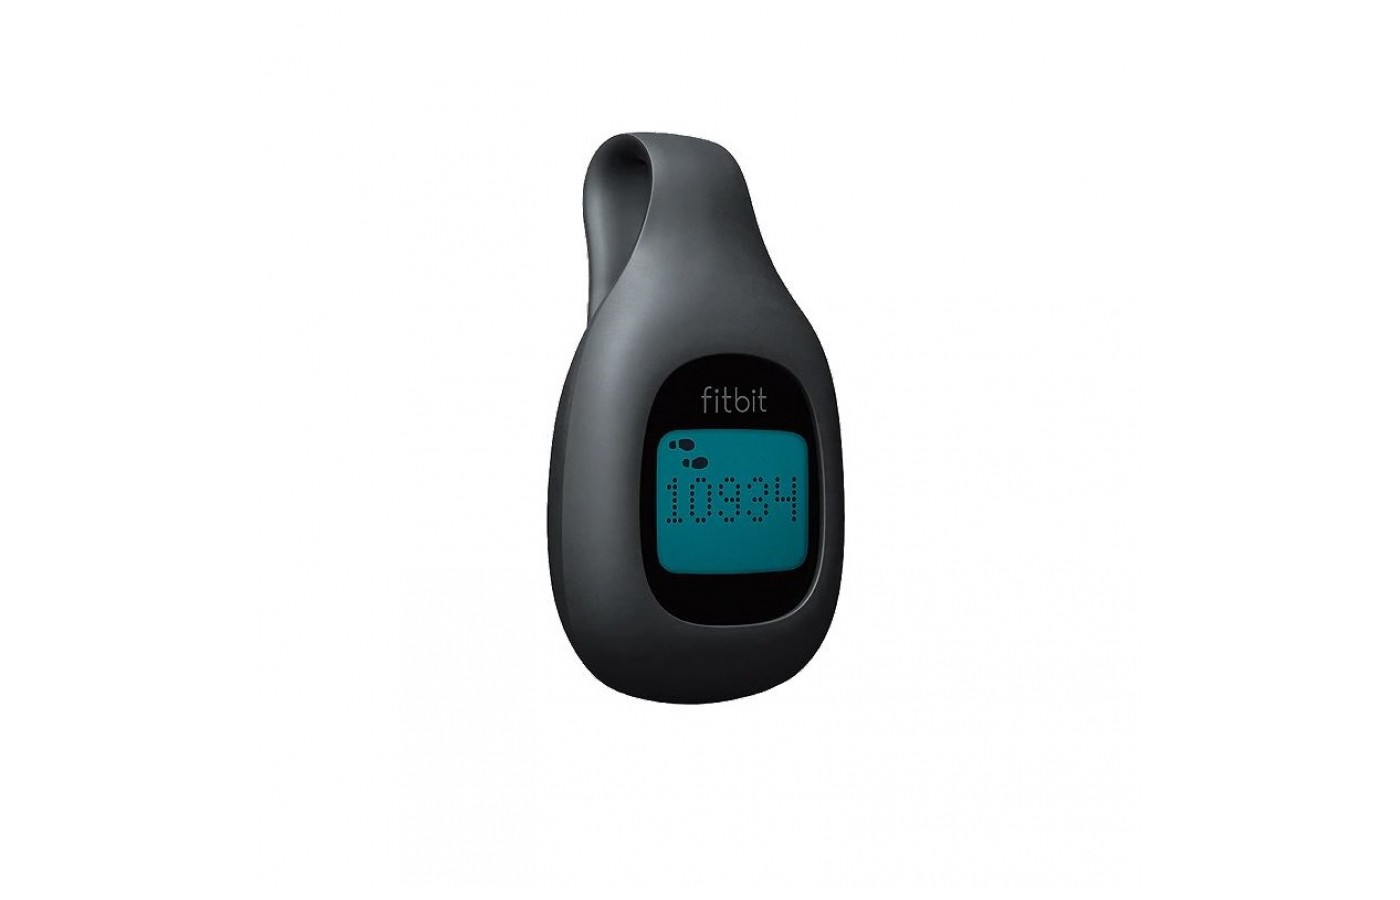 The Fitbit Zip offers a large tap display for easier use.